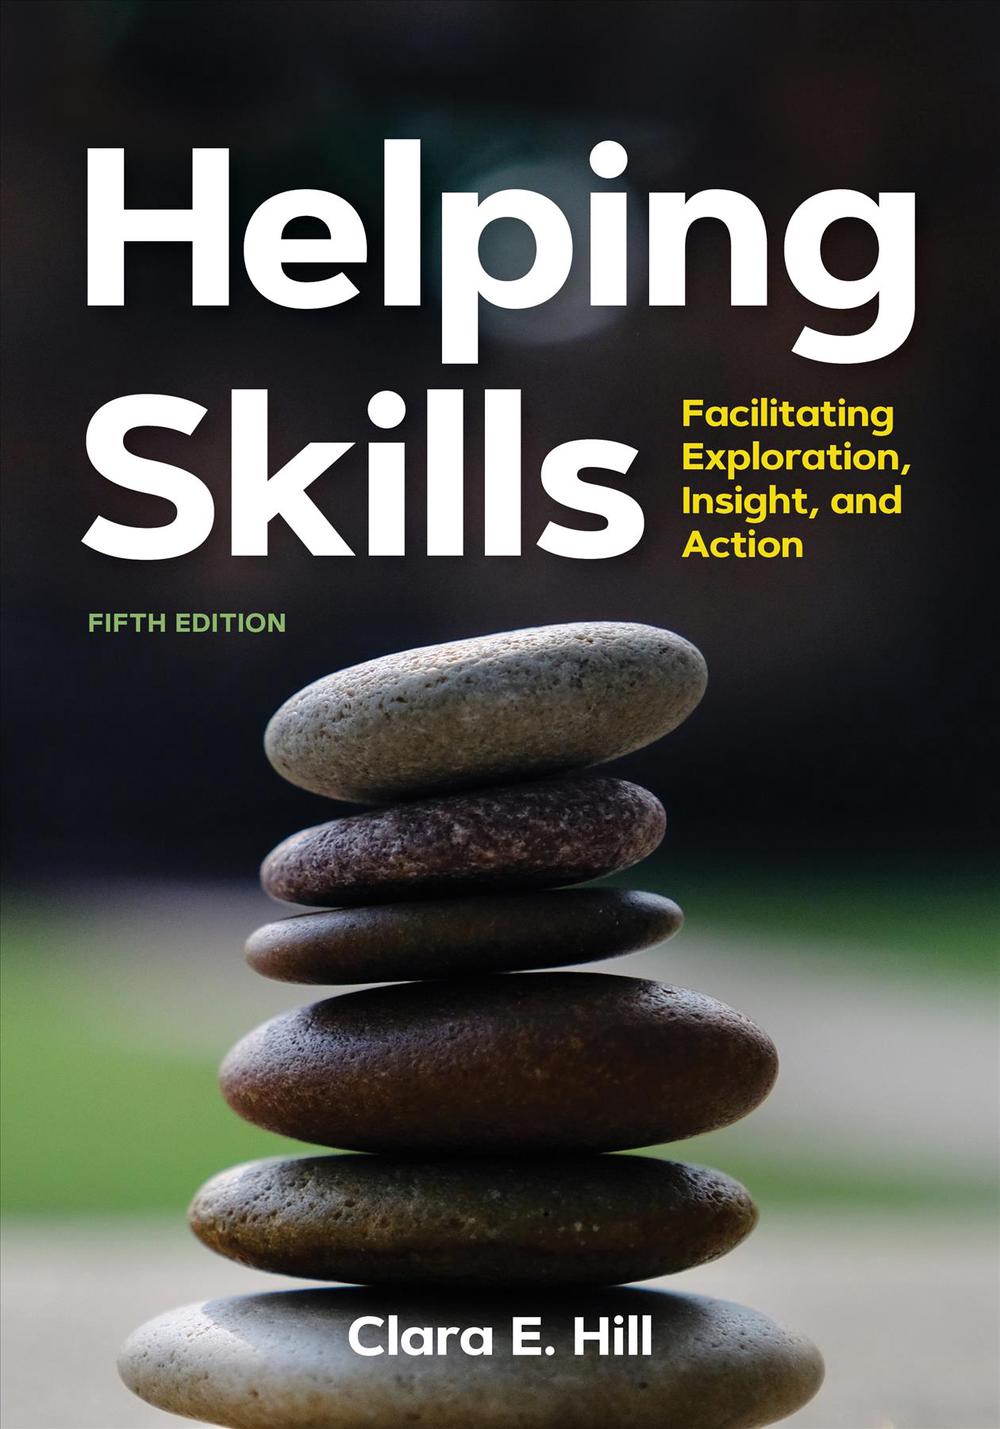 Helping Skills Facilitating Exploration, Insight, and Action 5th Edition by Cla 9781433831379